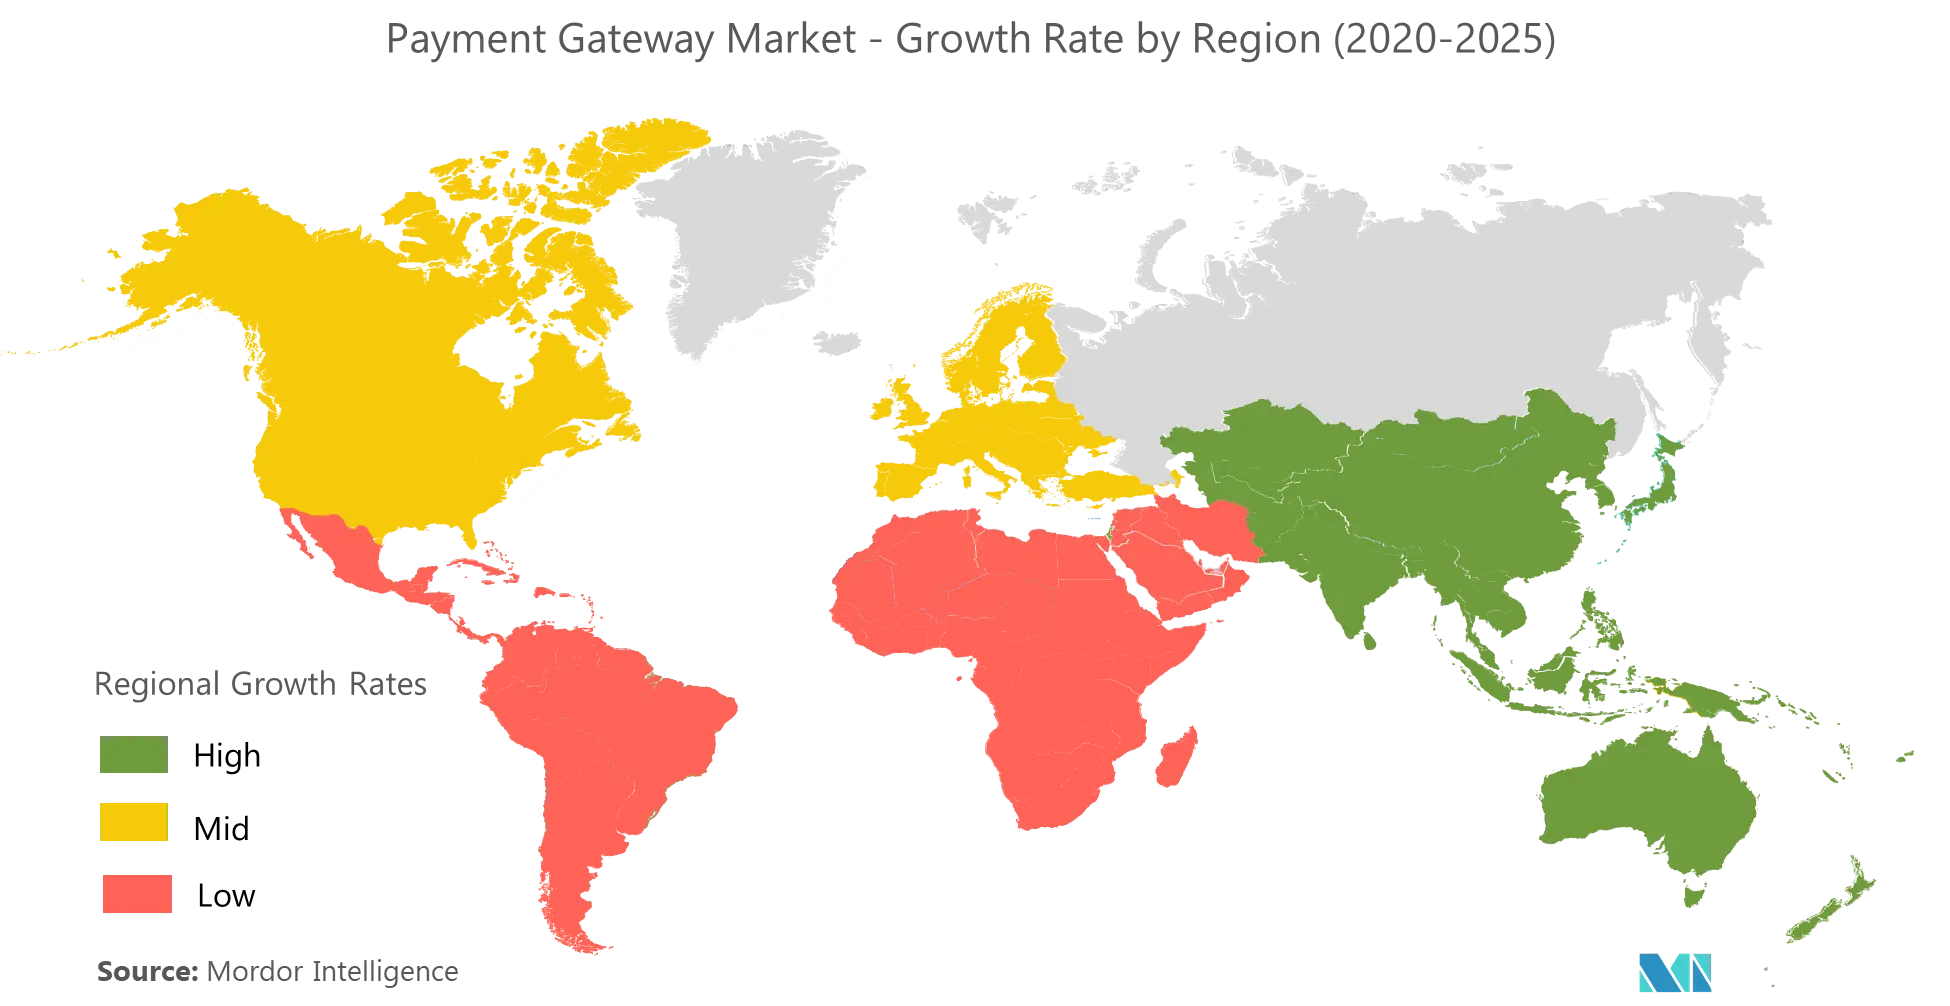 Payment Gateway Market - Growth Rate by Region (2020 - 2025)